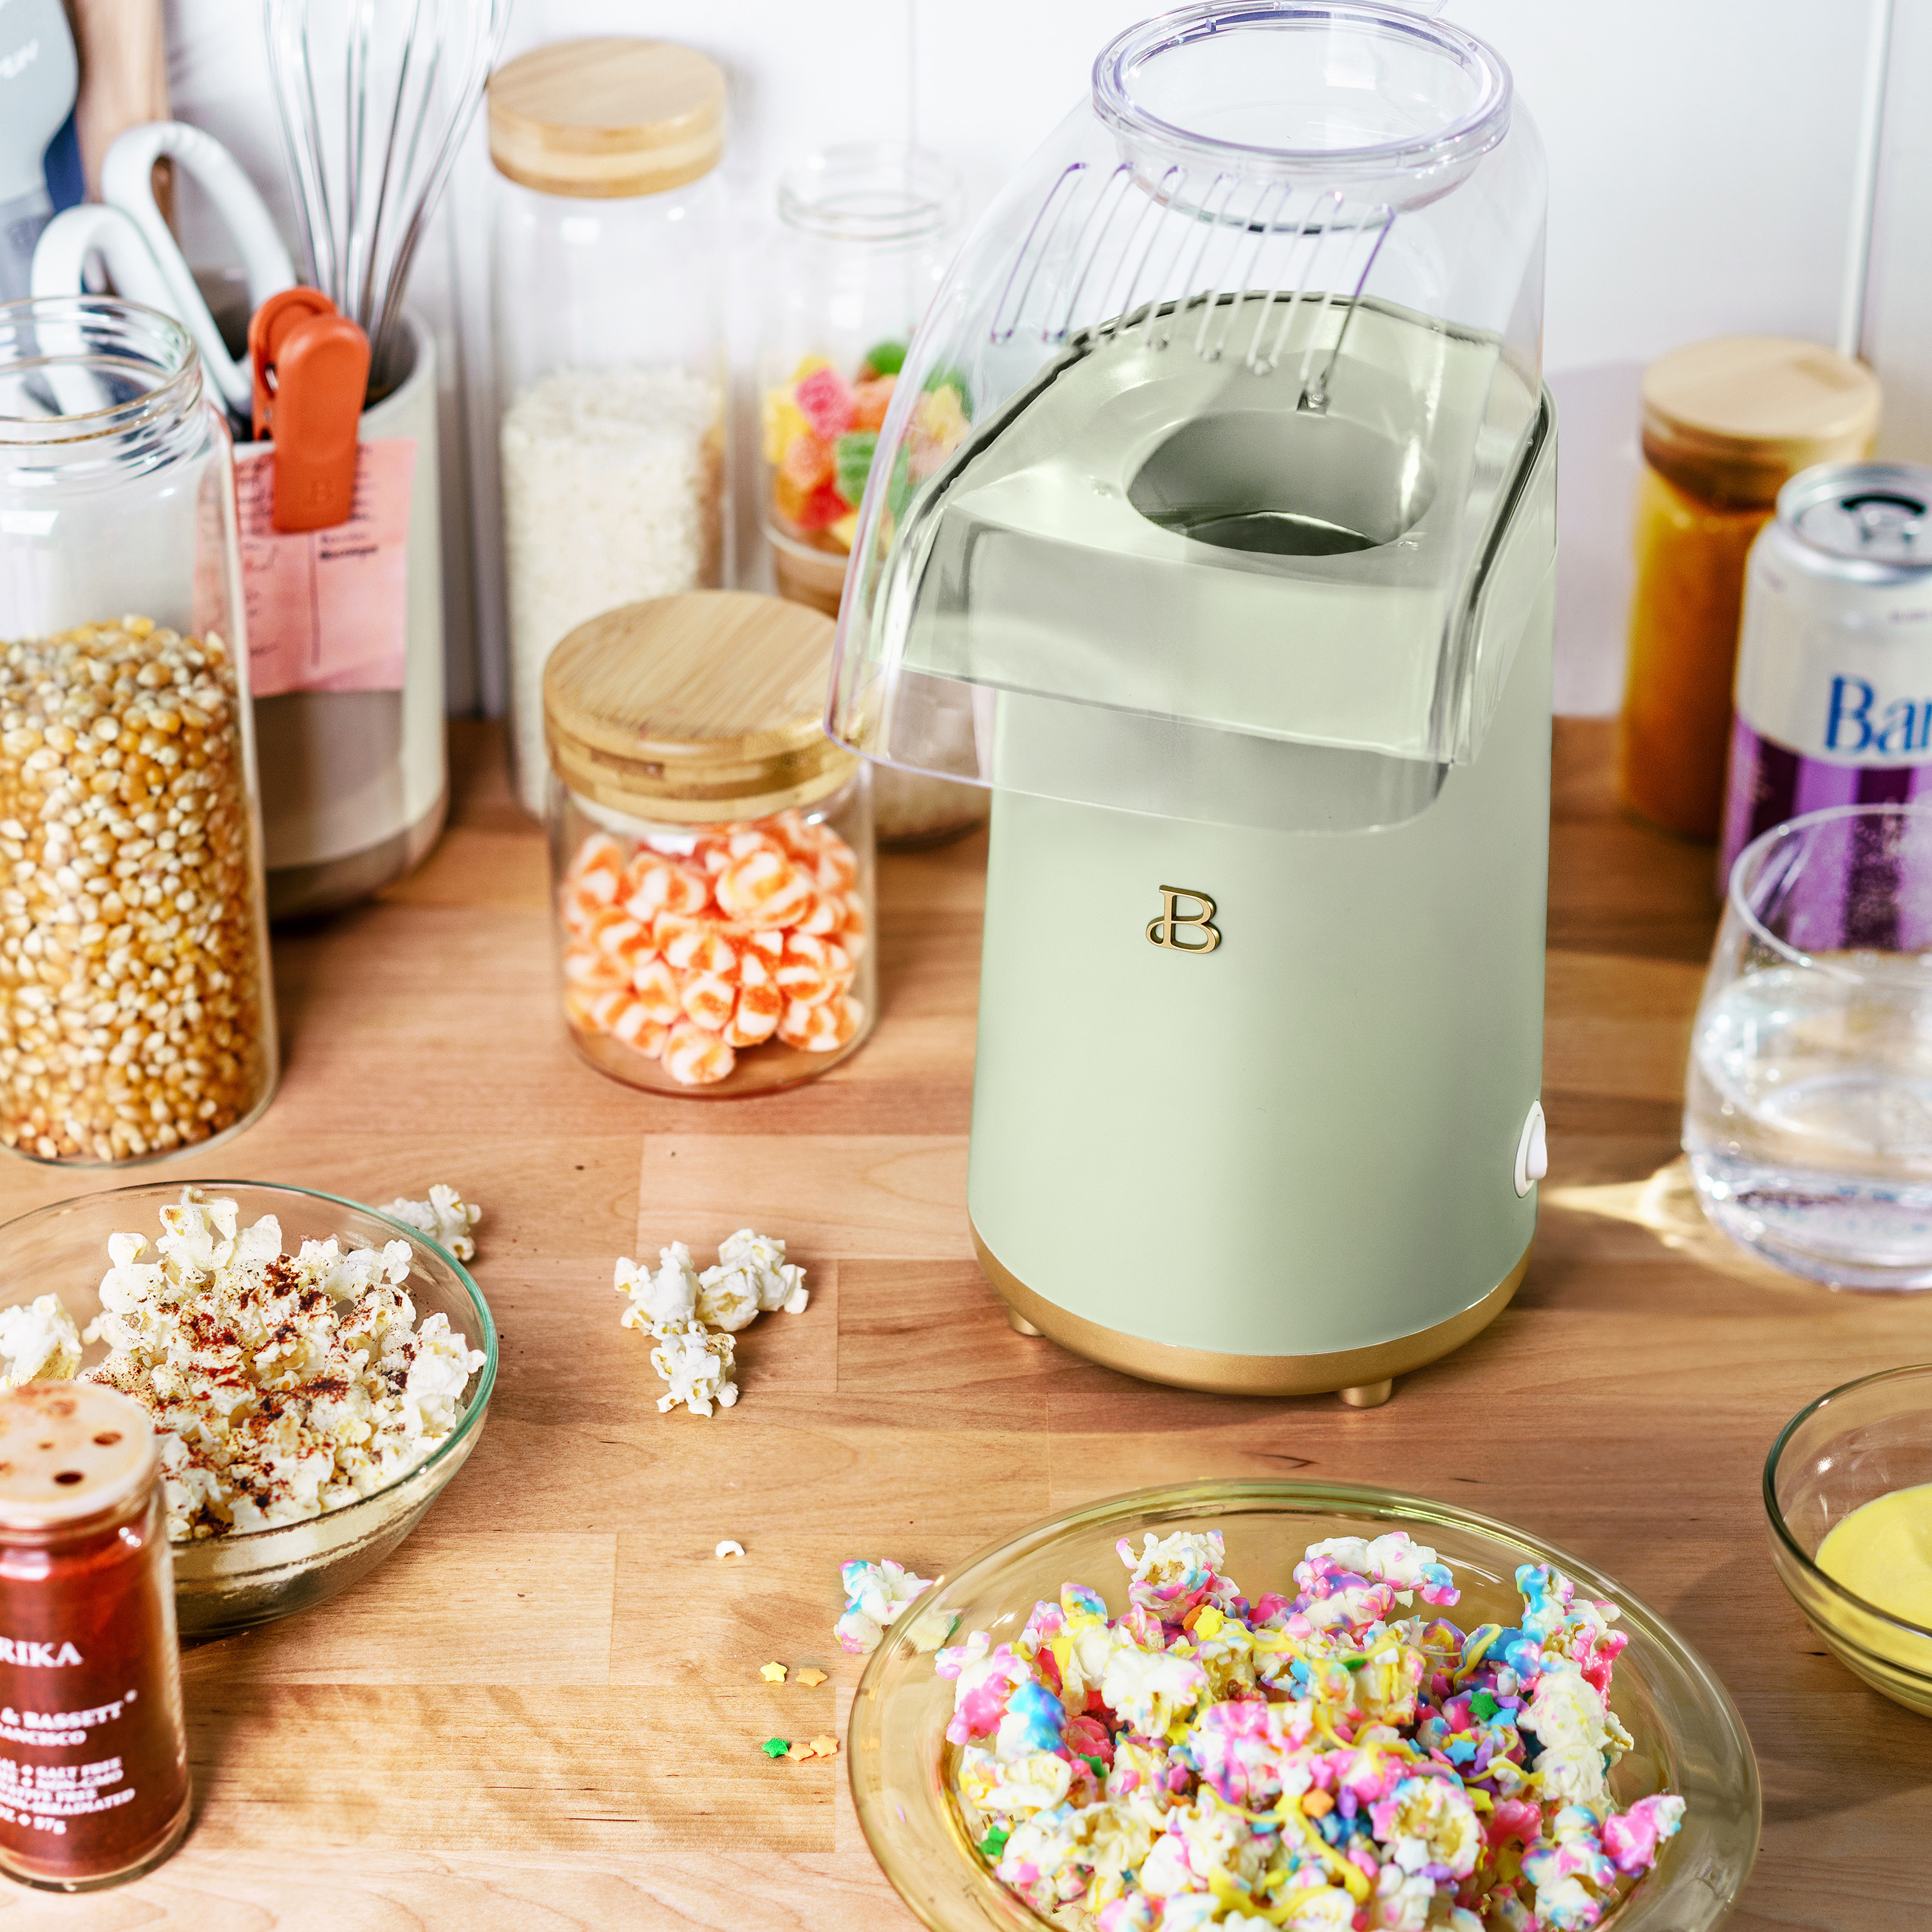 Beautiful 16 Cup Hot Air Electric Popcorn Maker, Sage Green by Drew Barrymore - image 2 of 13